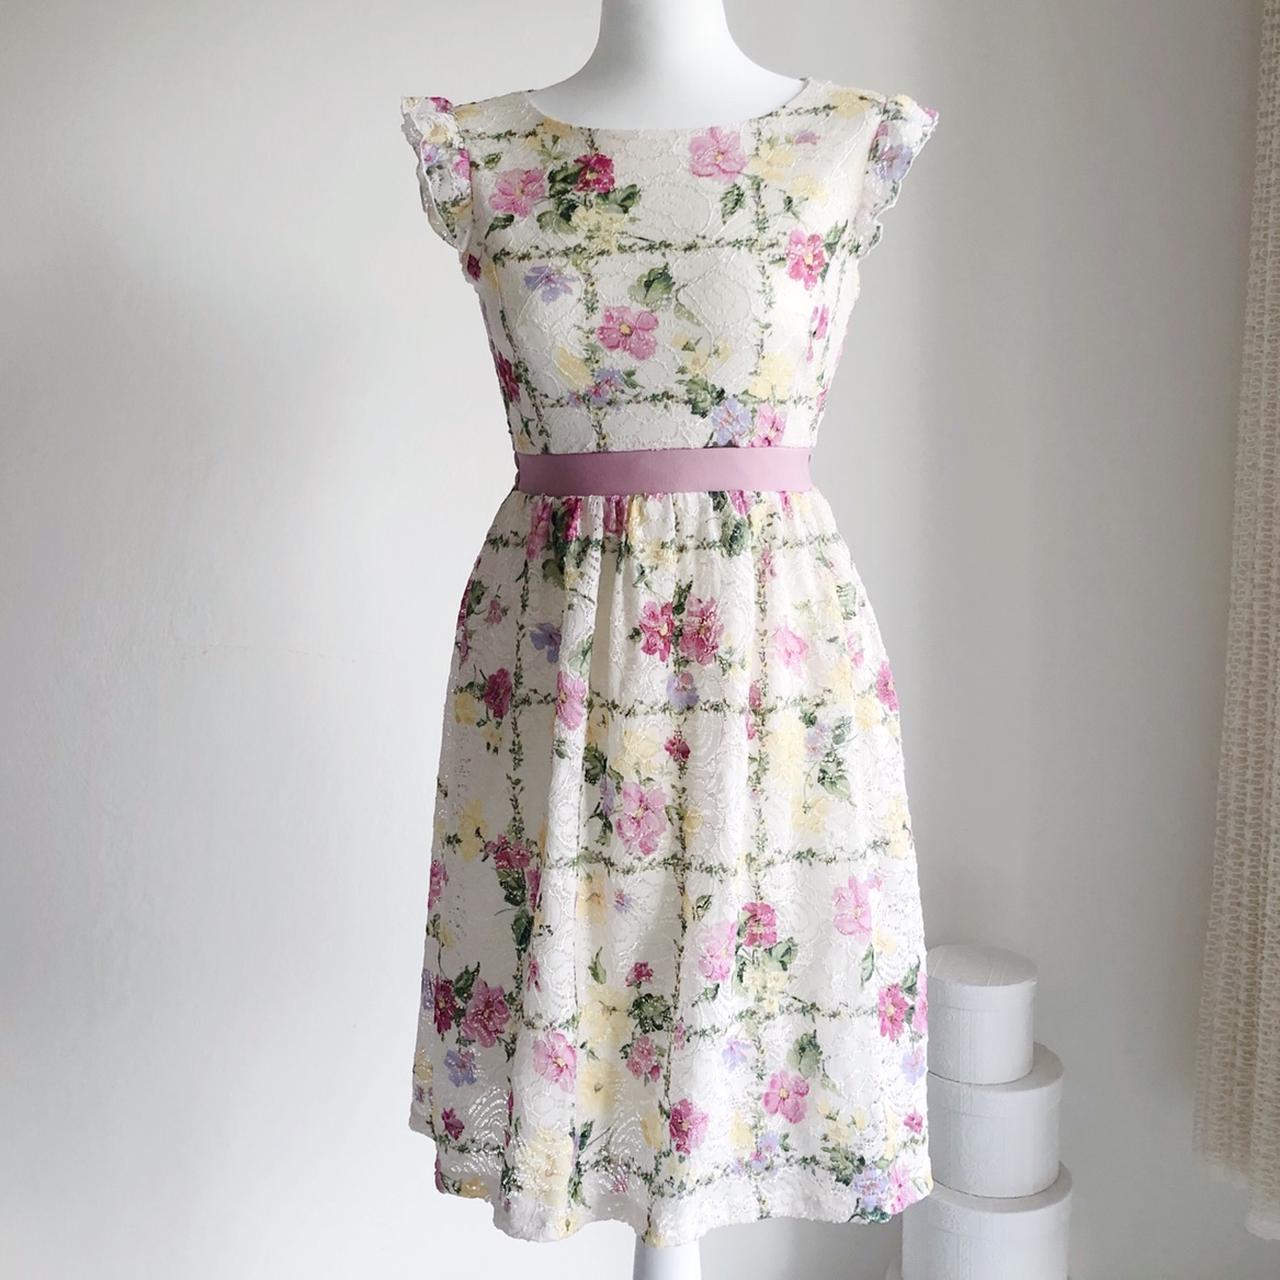 Women's White and Pink Dress (3)